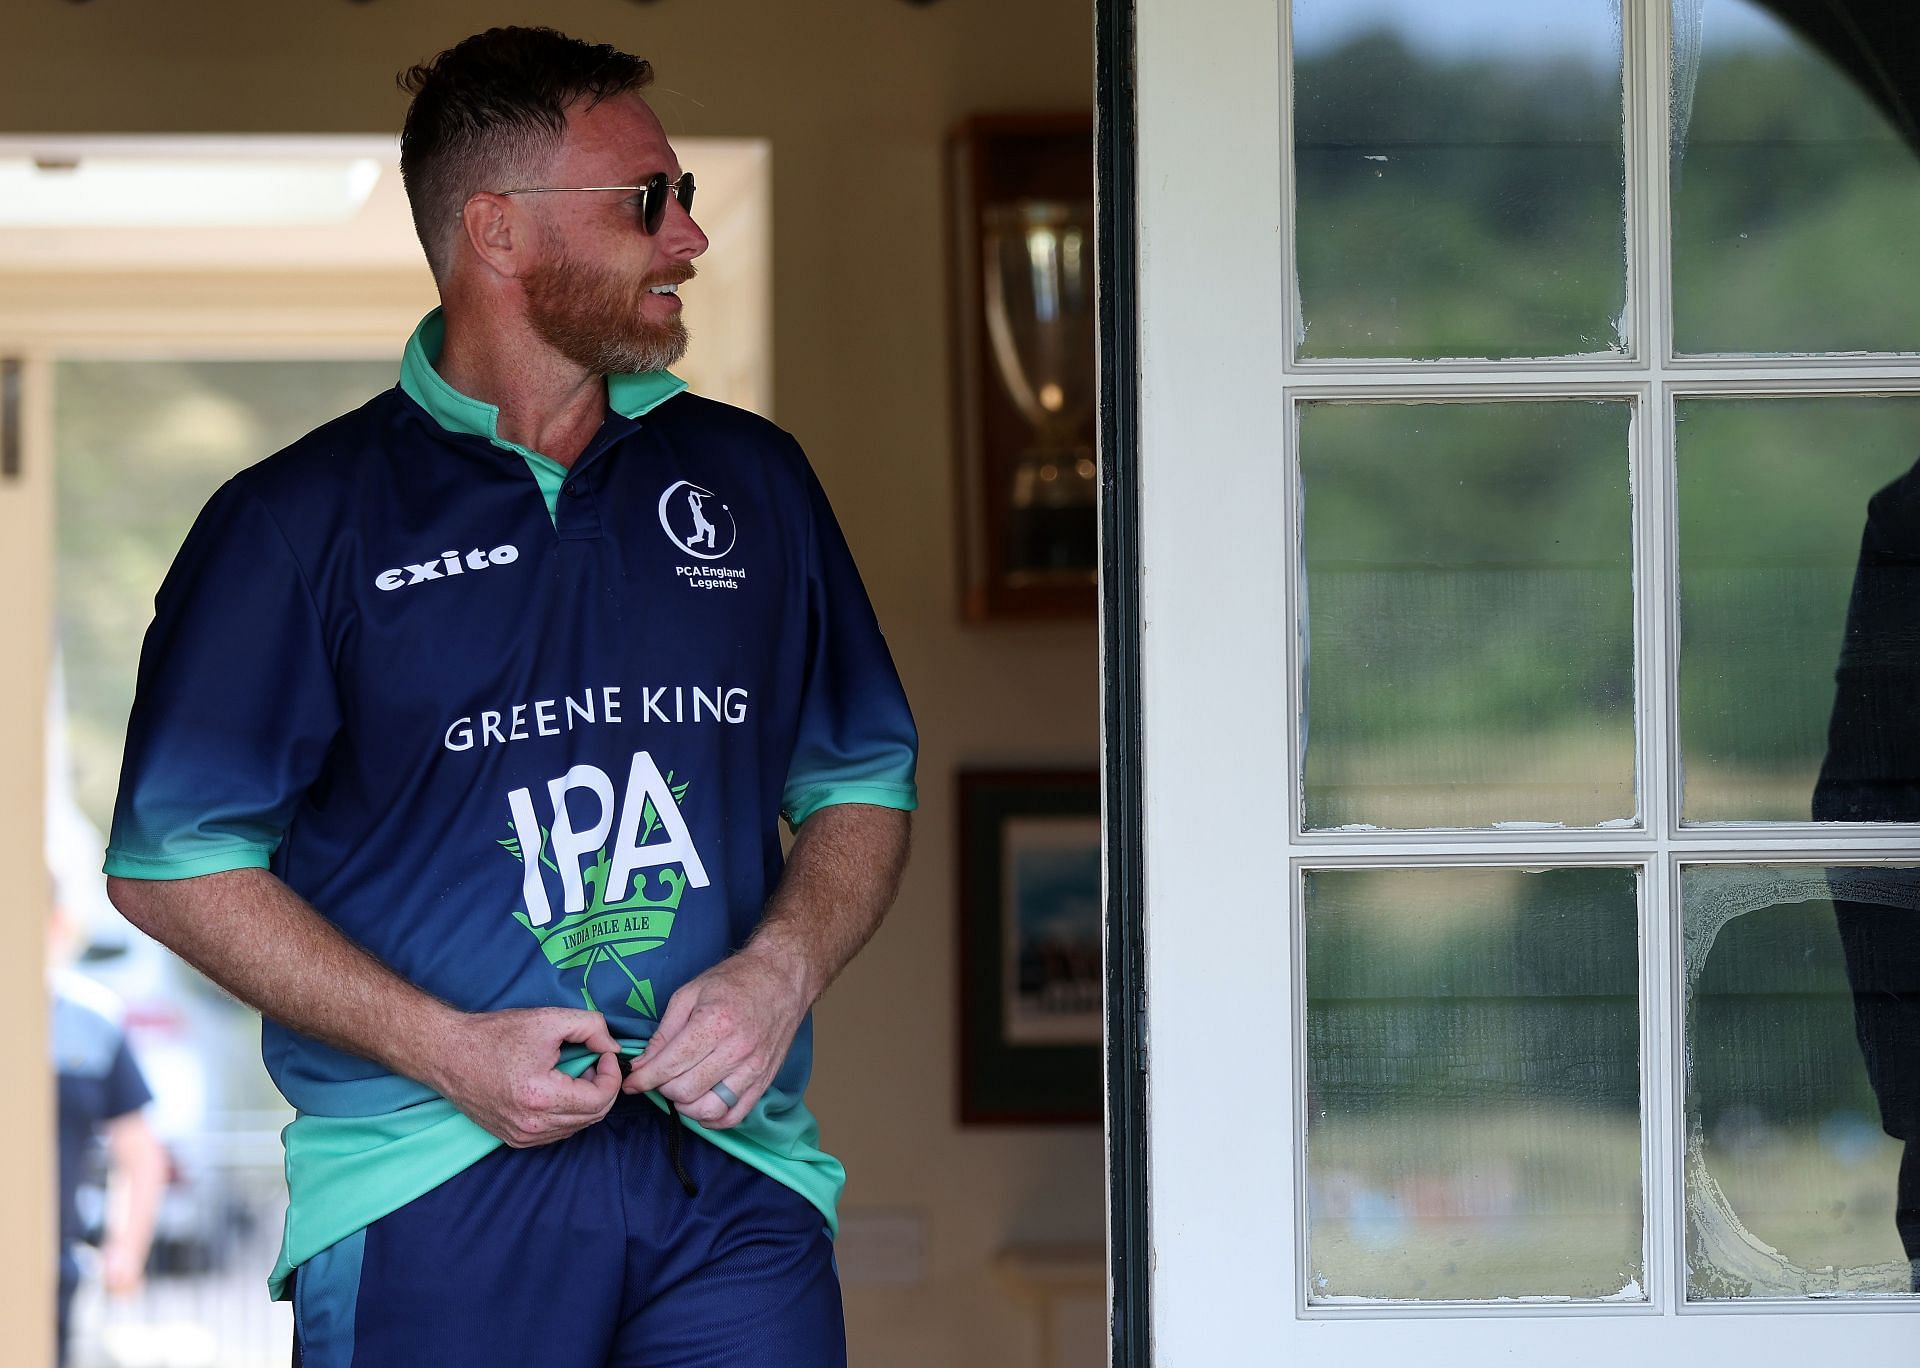 Ian Bell during the PCA Festival of Cricket. (Image: Getty)